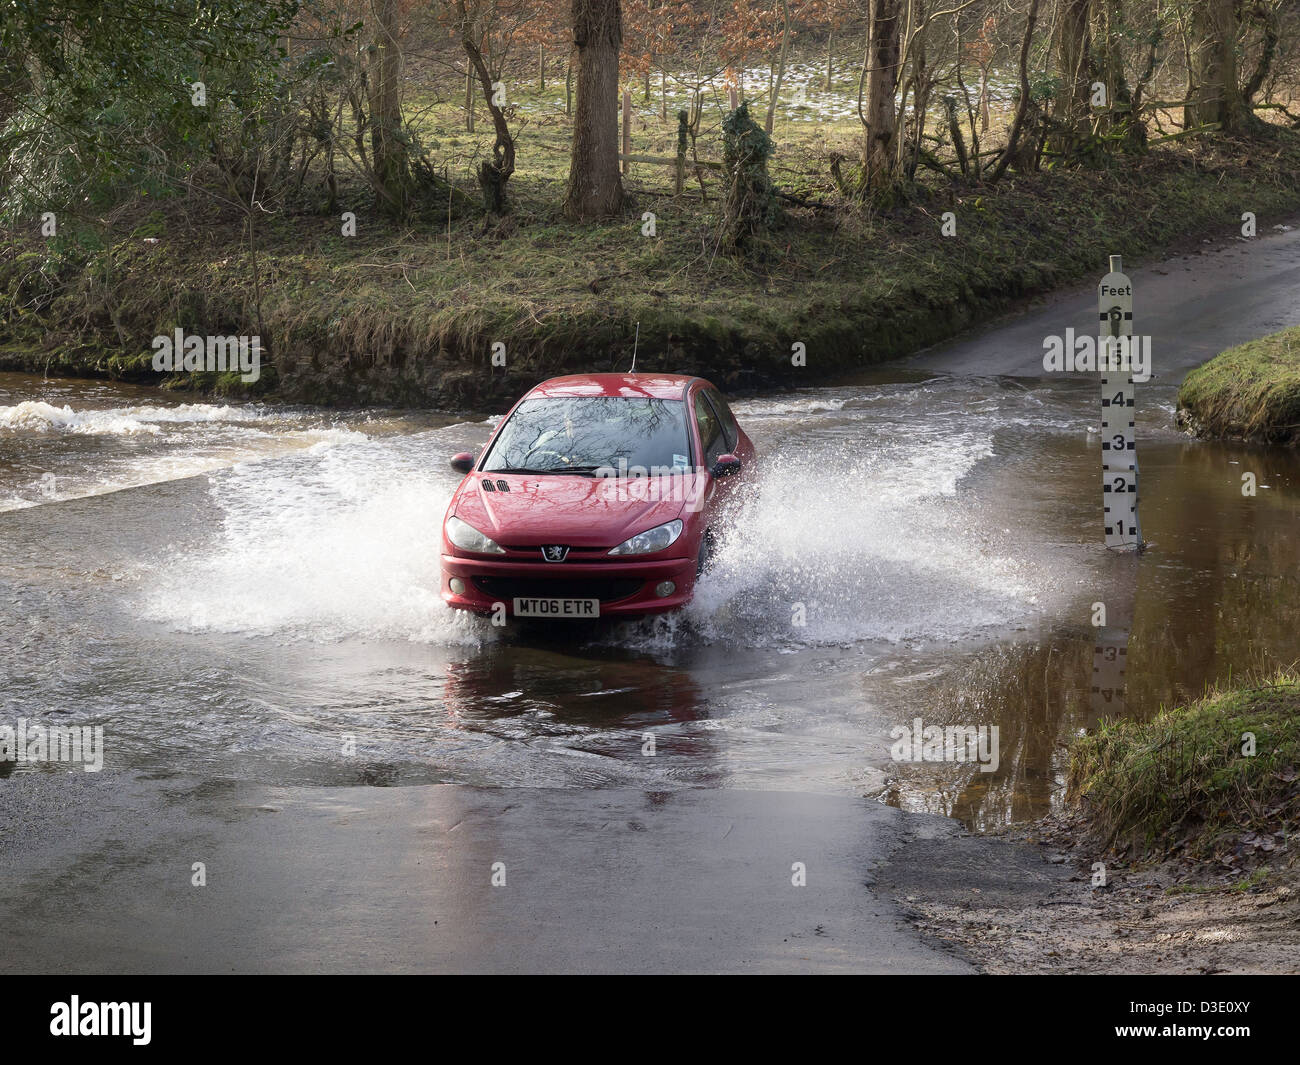 A red Peugeot motor car driven fast crossing a ford over a stream in the North Yorkshire Moors Stock Photo